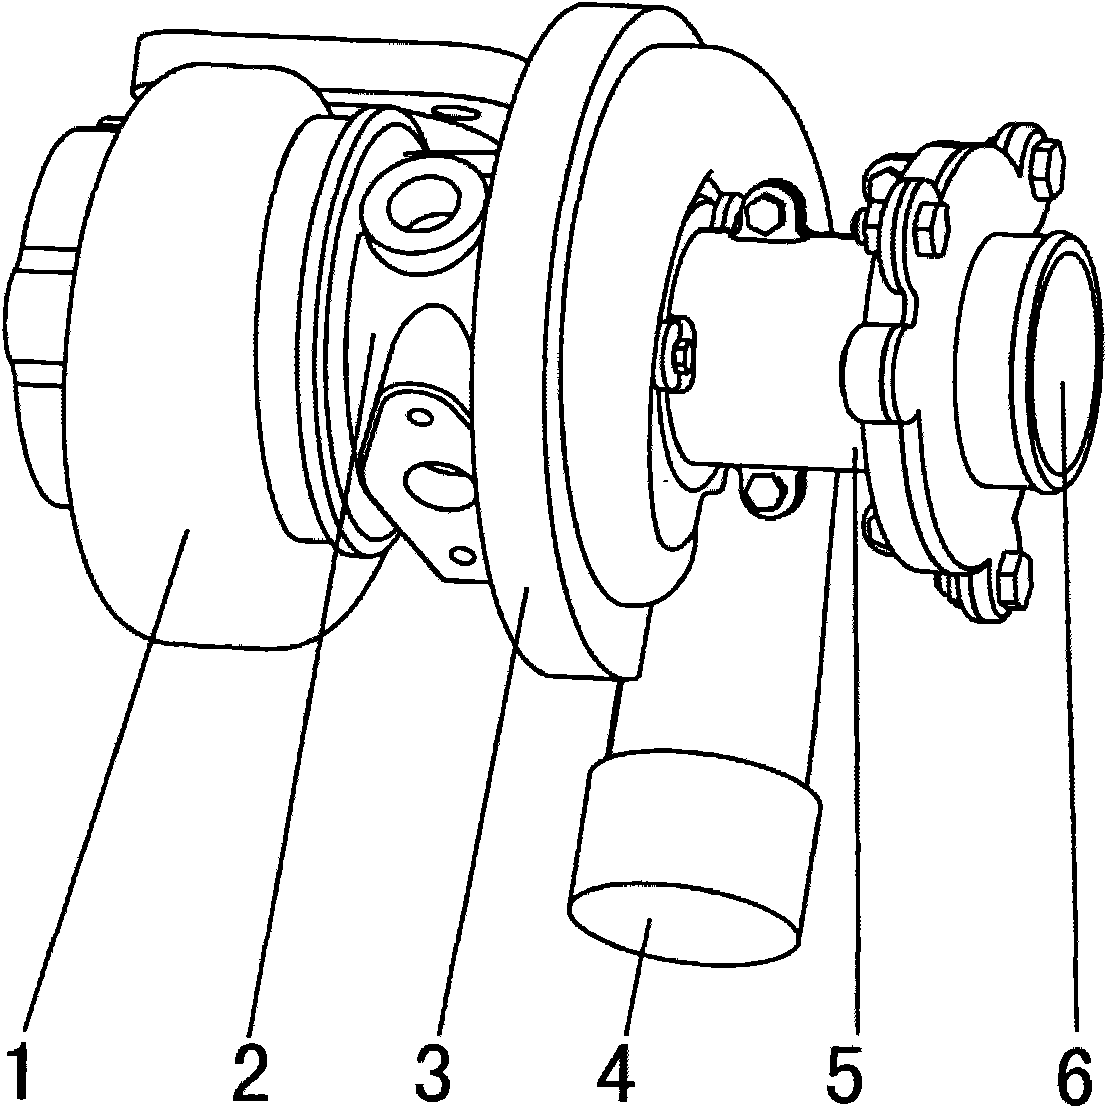 Variable air inlet turbocharger structure